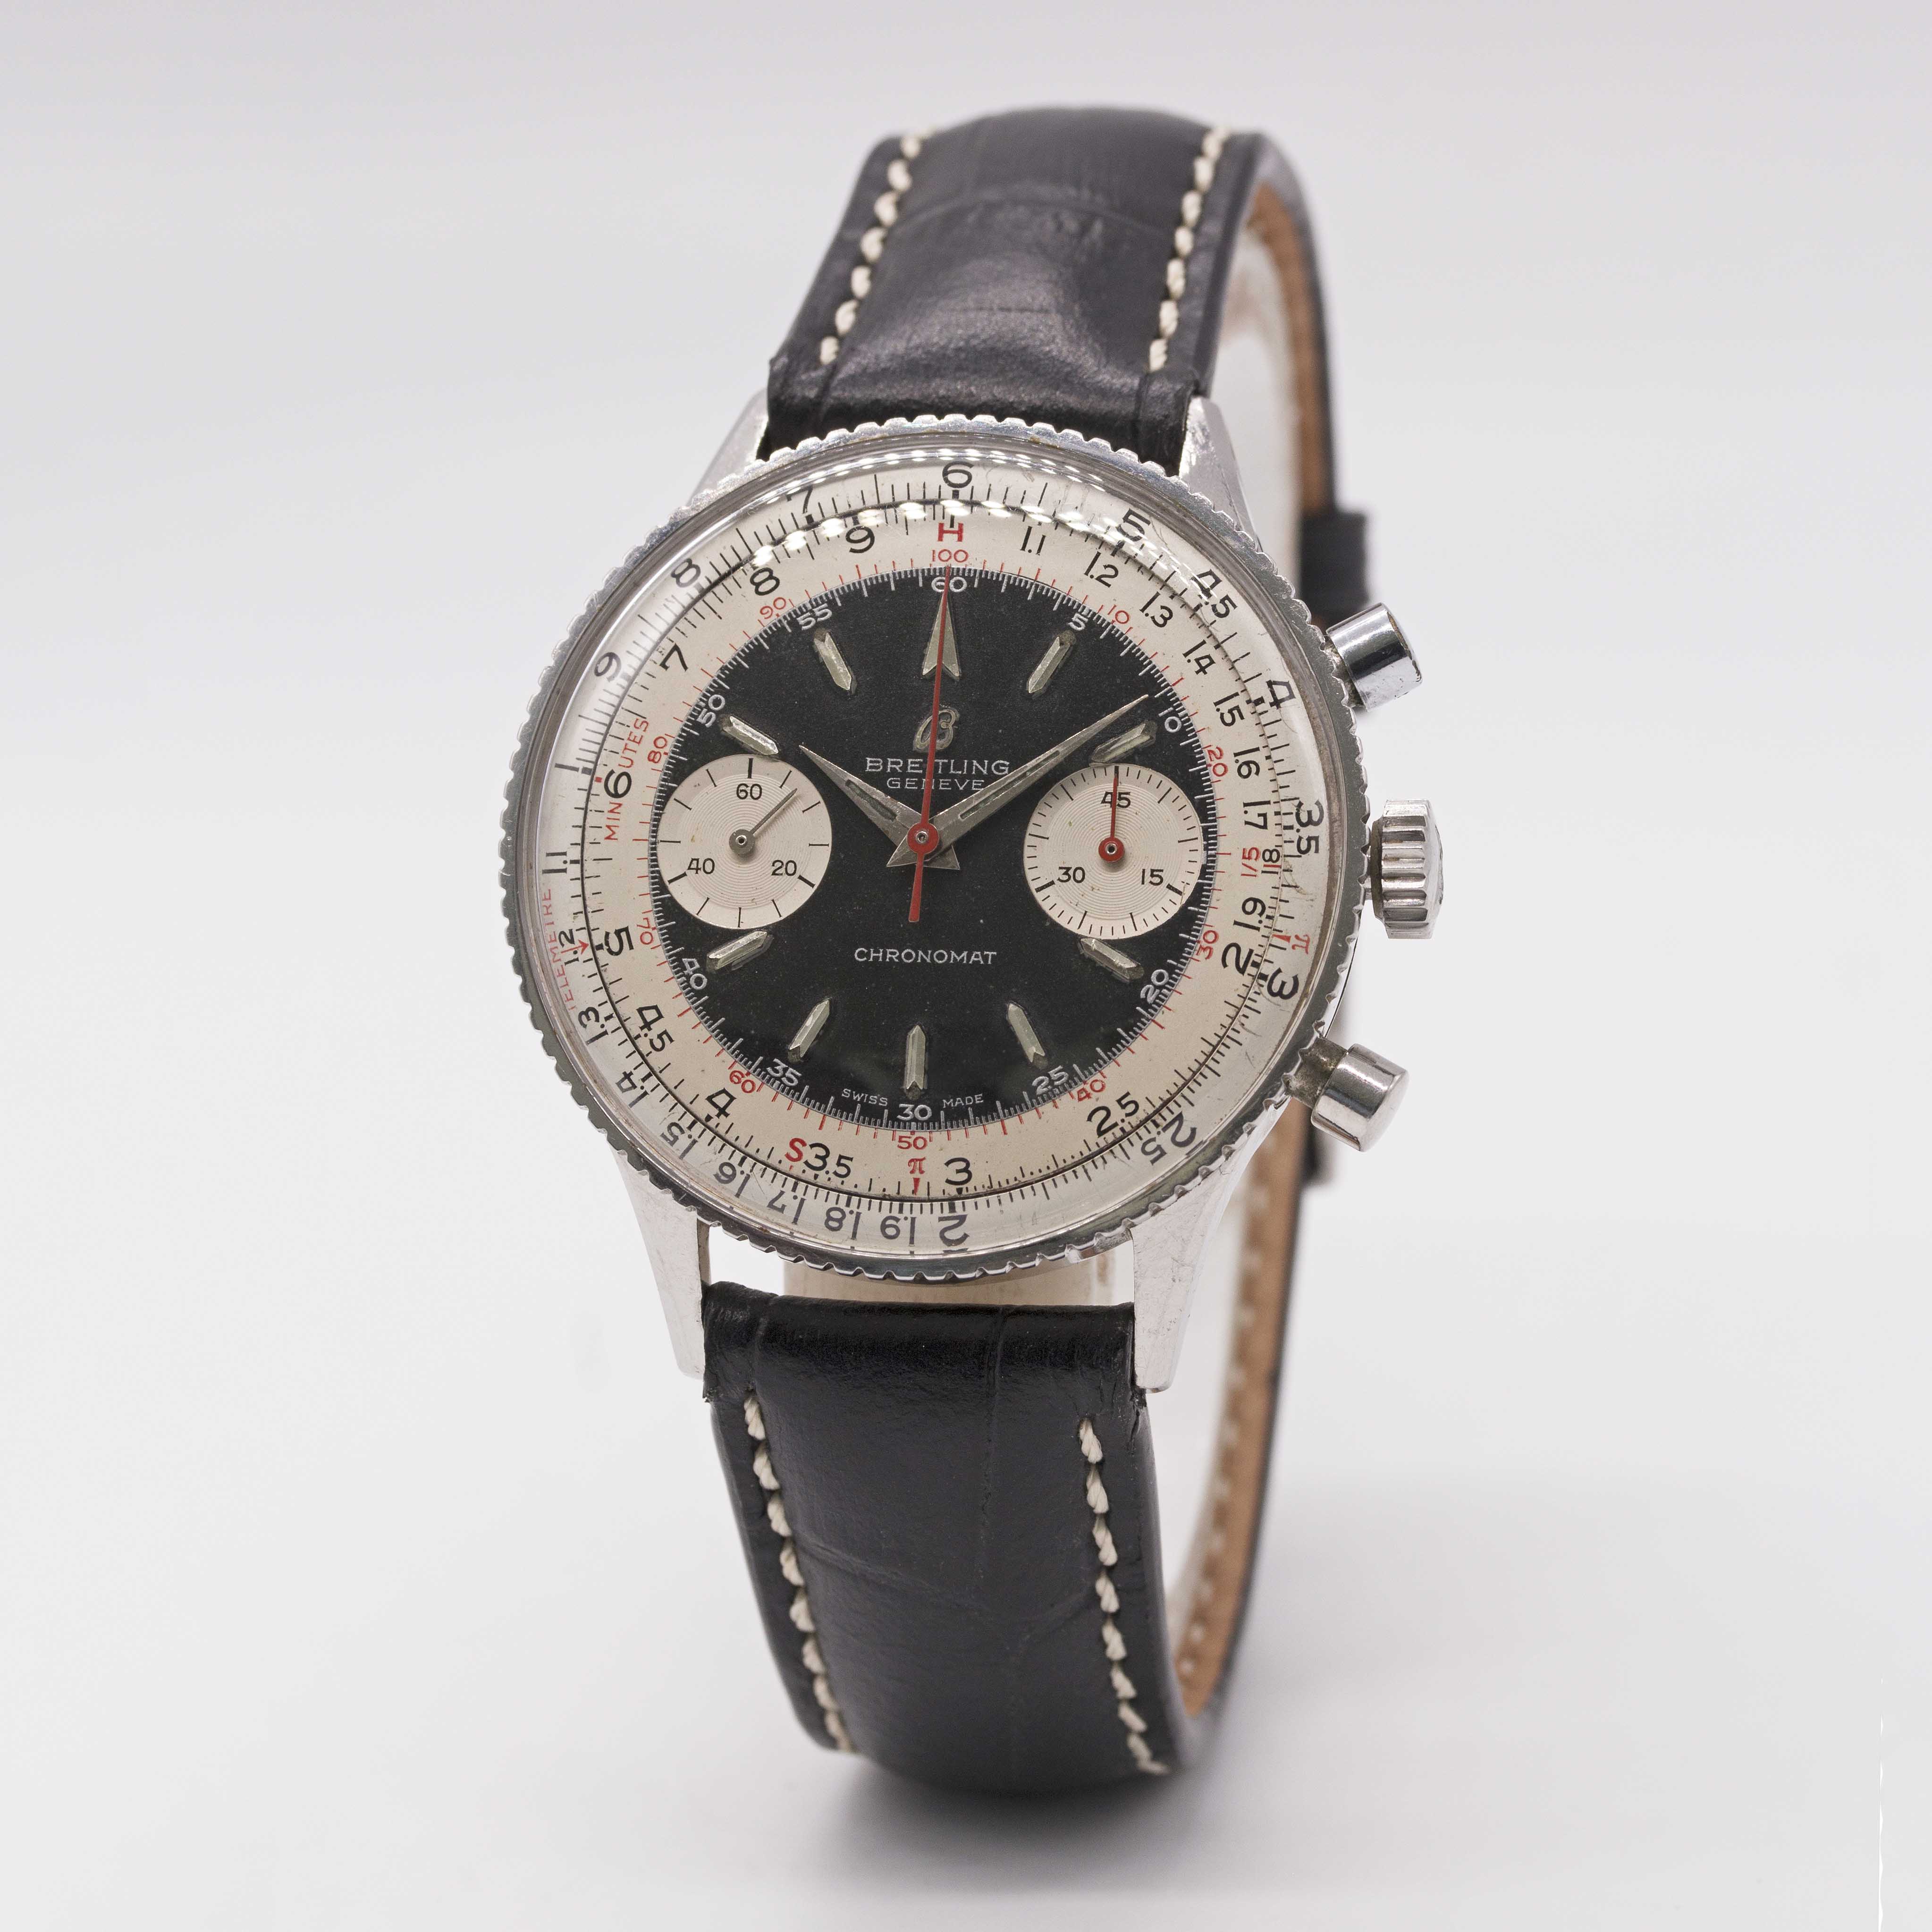 A GENTLEMAN'S STAINLESS STEEL BREITLING CHRONOMAT CHRONOGRAPH WRIST WATCH CIRCA 1963, REF. 808 - Image 4 of 10